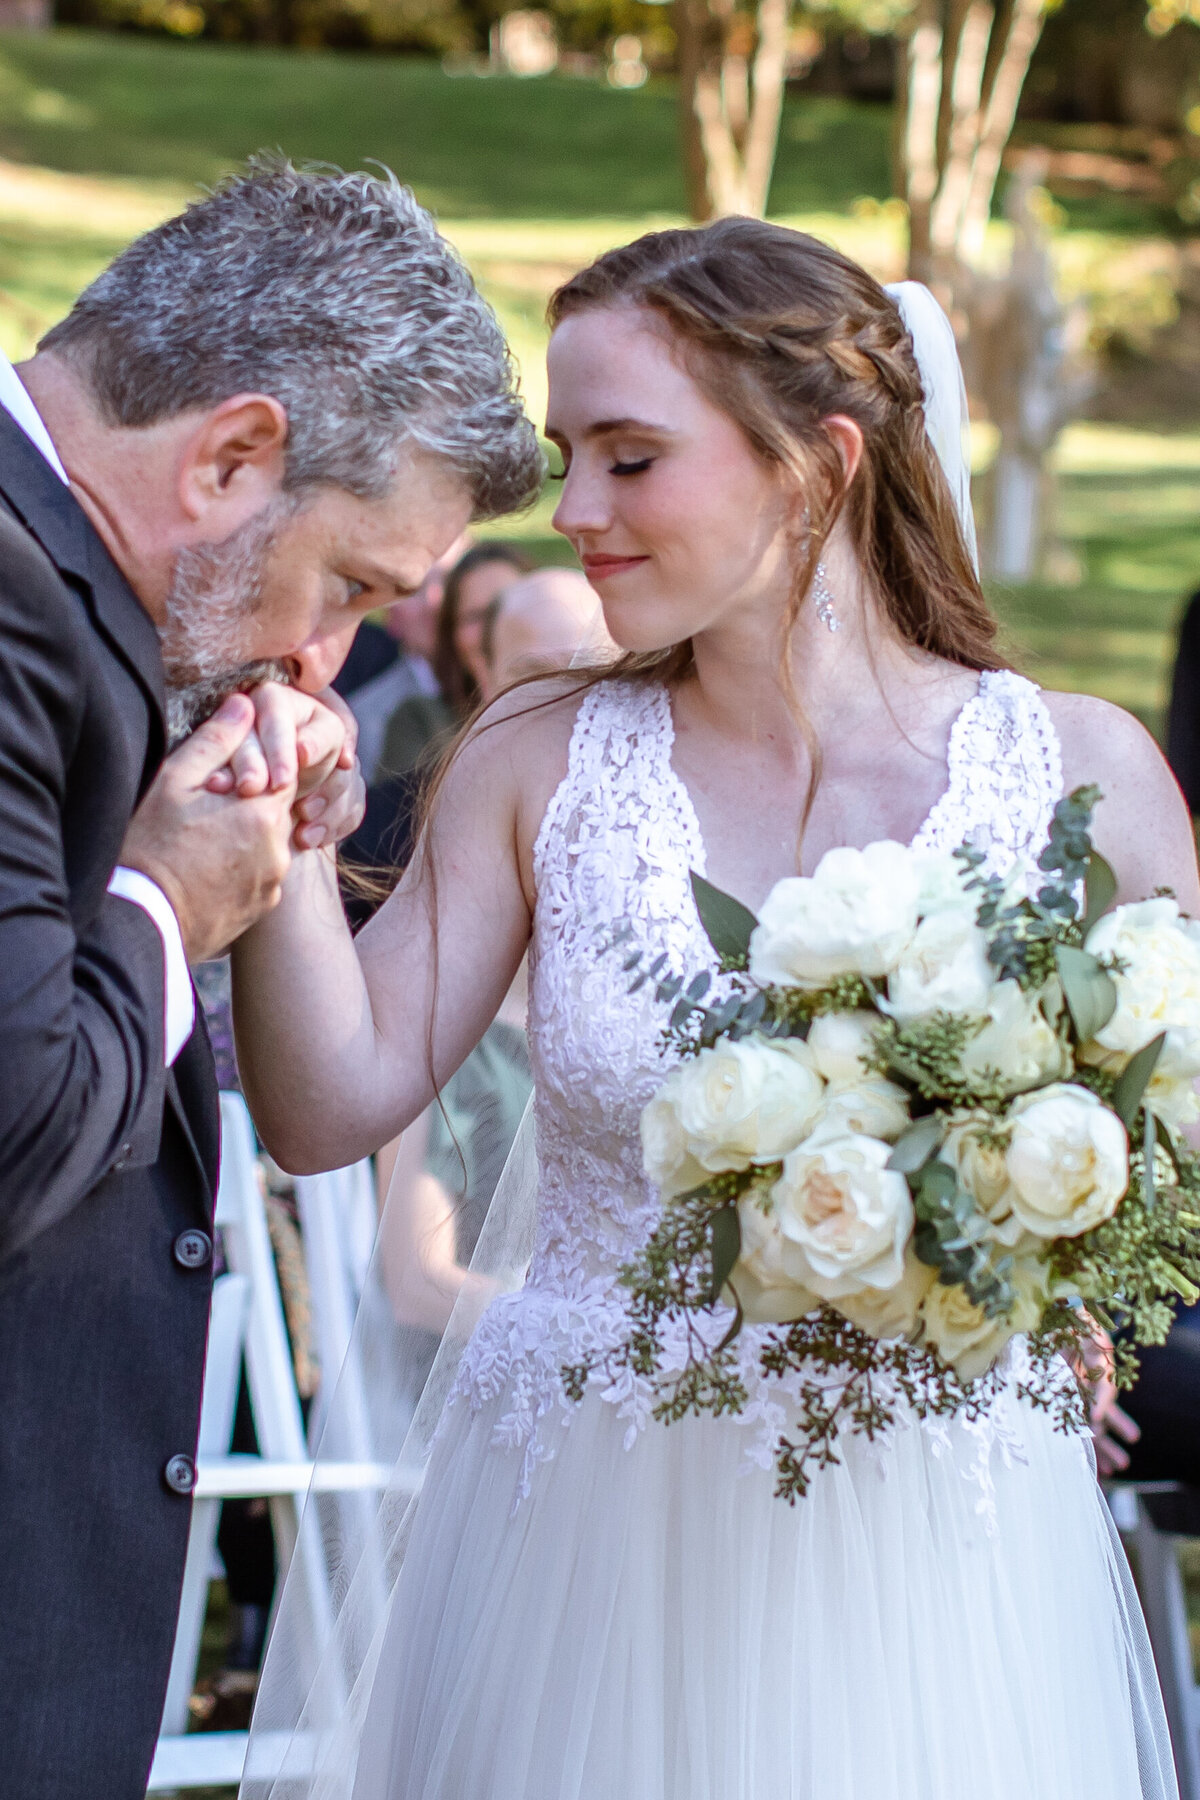 father of bride kisses her hand while she holds white bouquet at Milltown Historic District in New Braunfels Texas